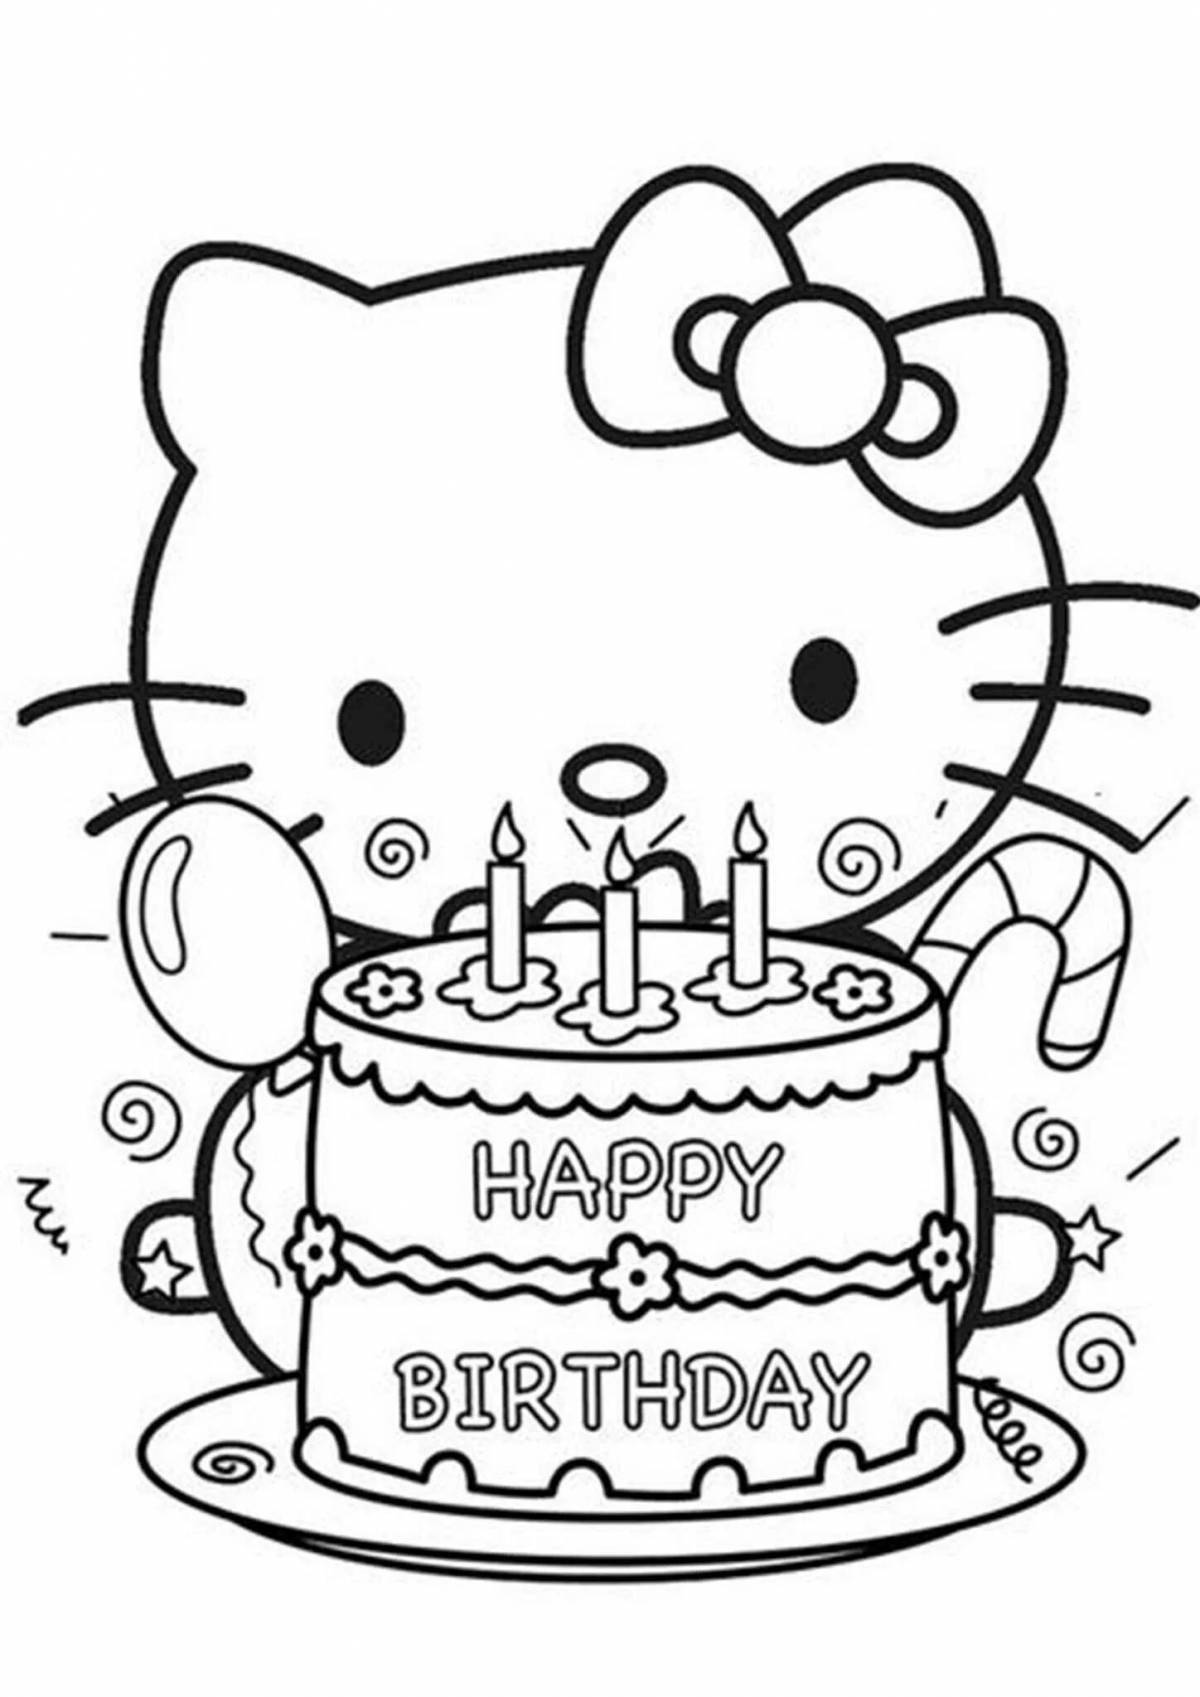 Sparkly happy birthday sister coloring page